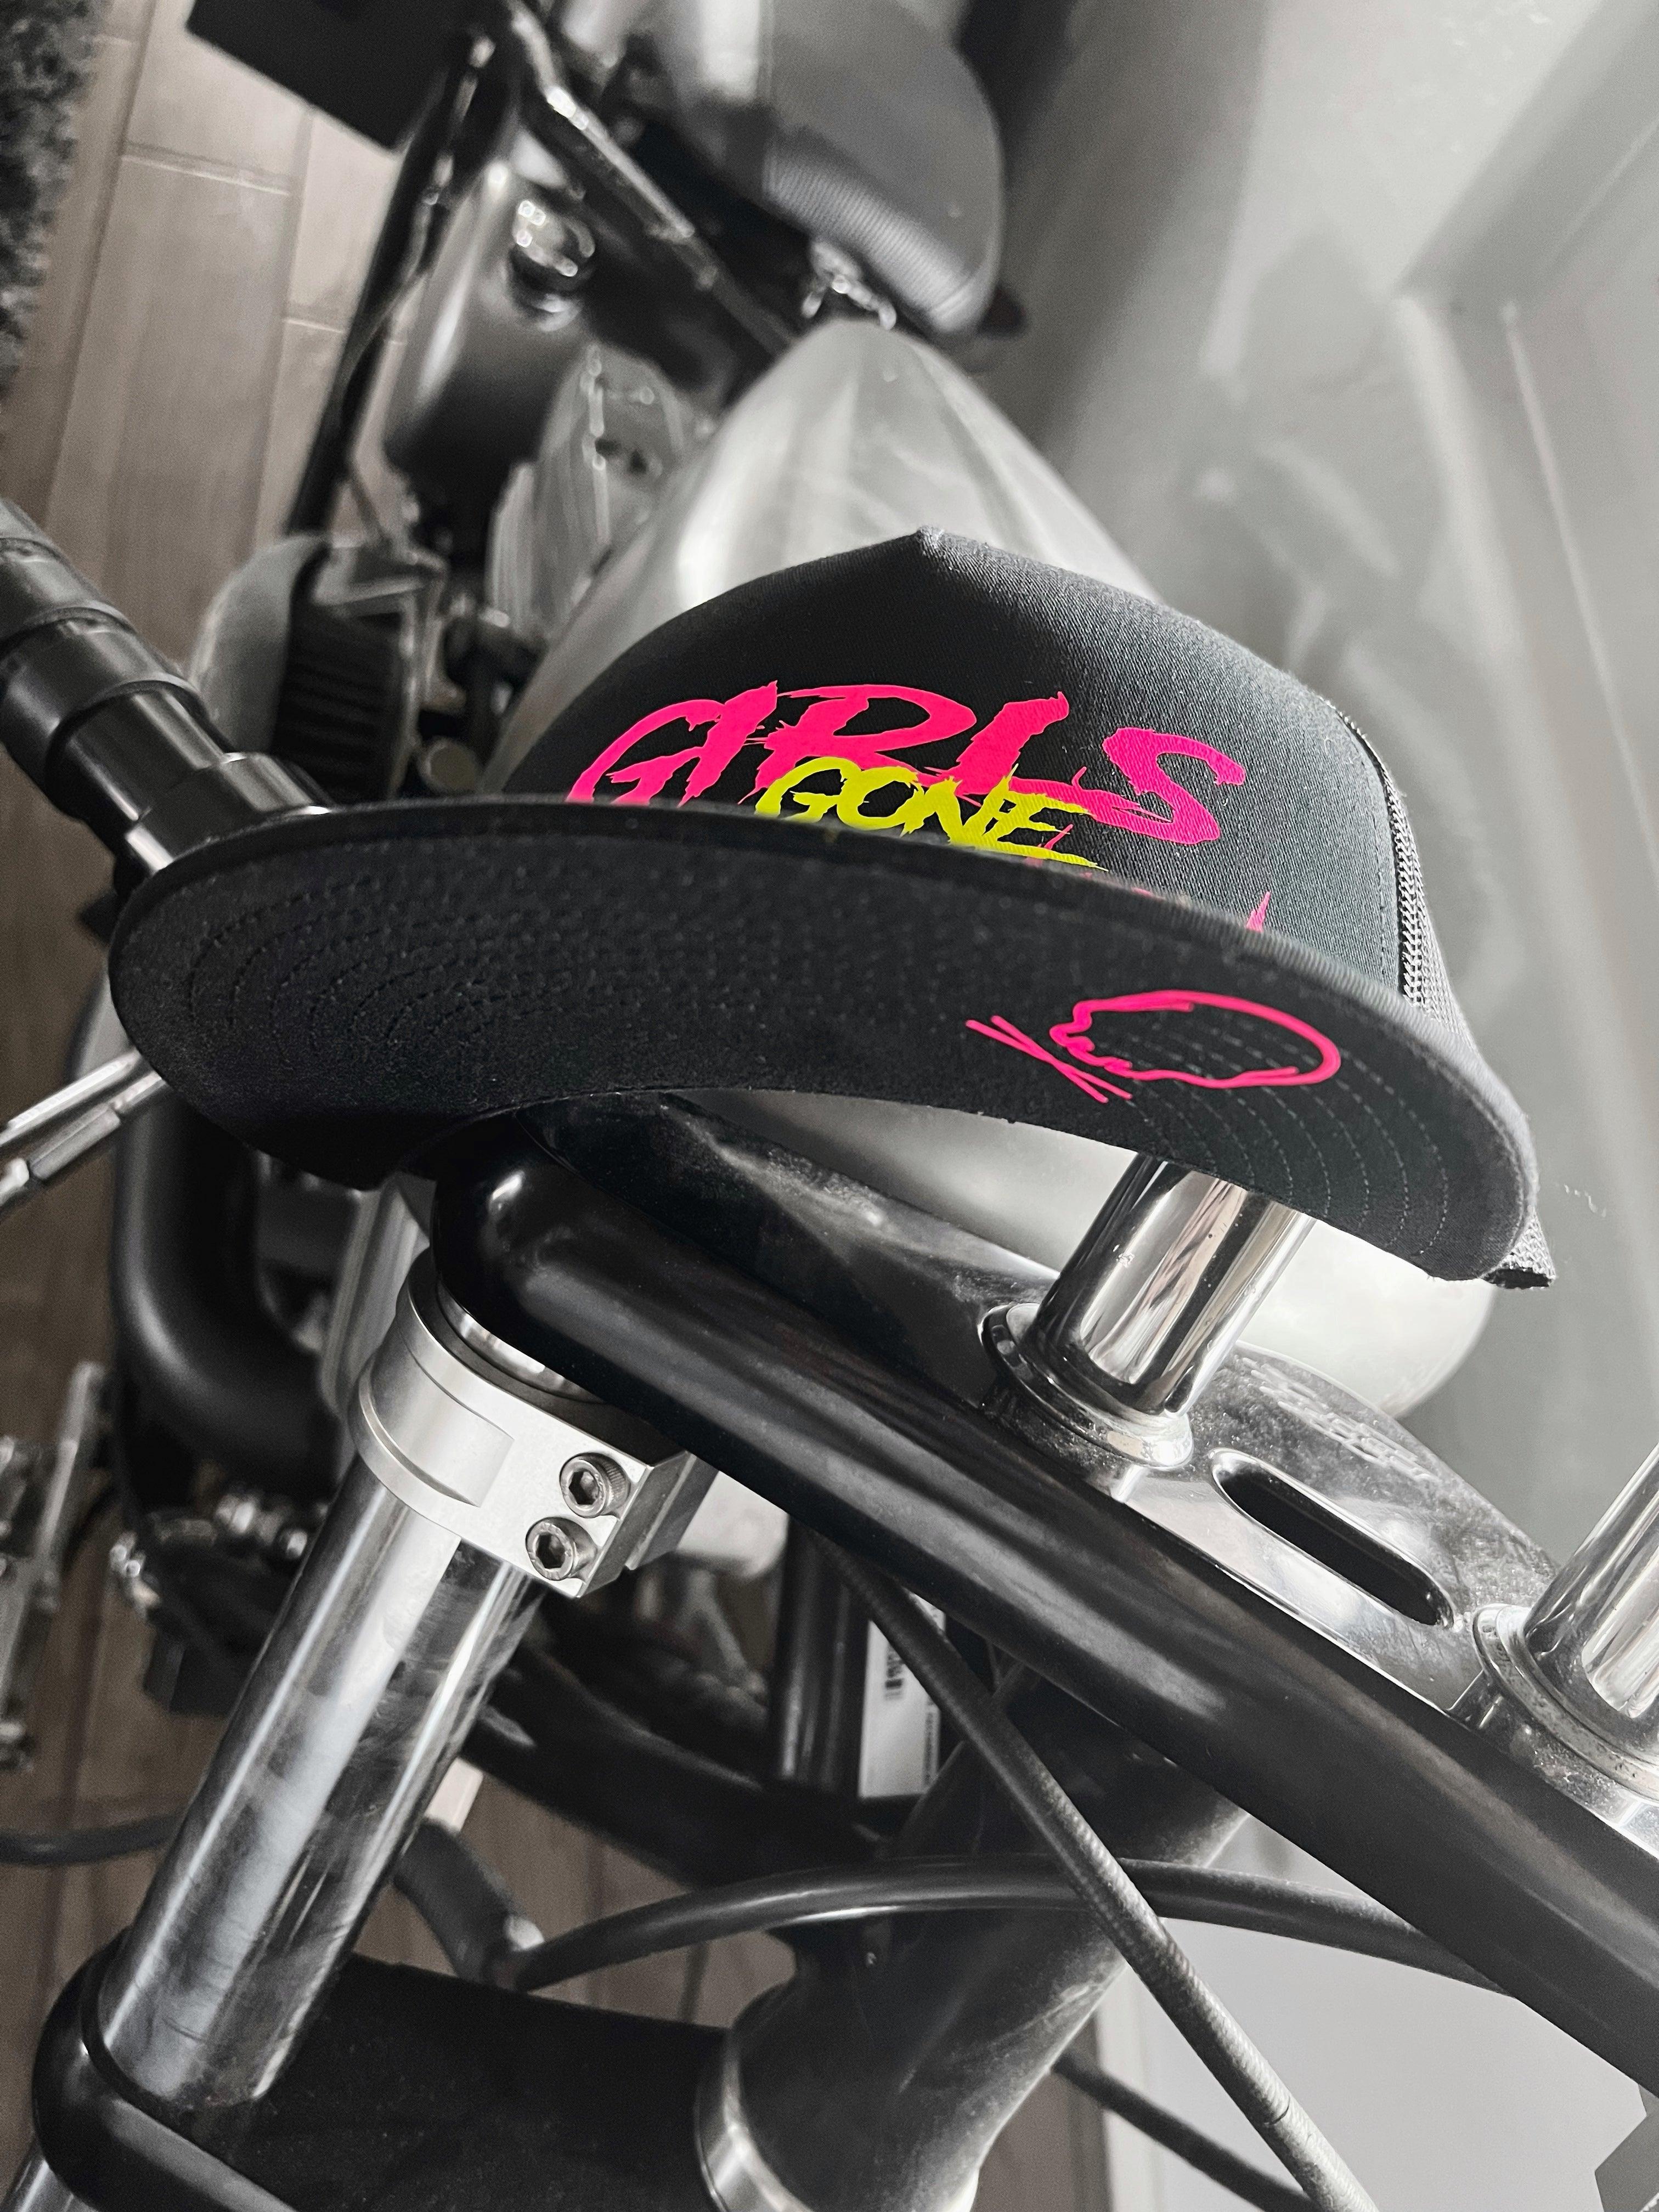 GIRLS GONE BLACK HAT - The Drive Clothing